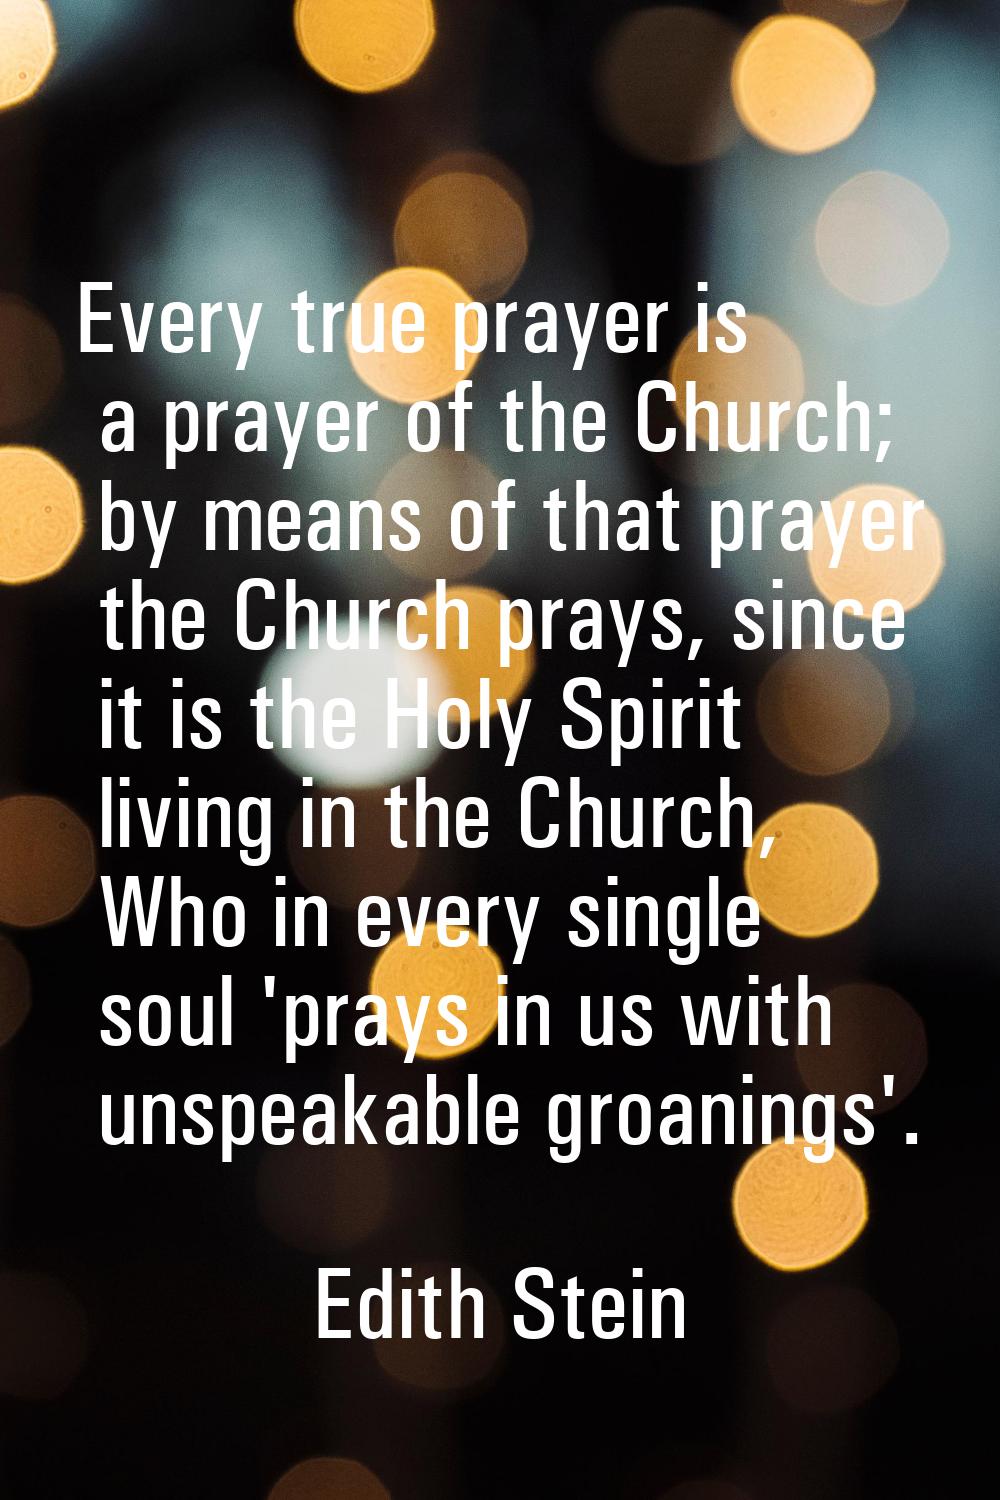 Every true prayer is a prayer of the Church; by means of that prayer the Church prays, since it is 